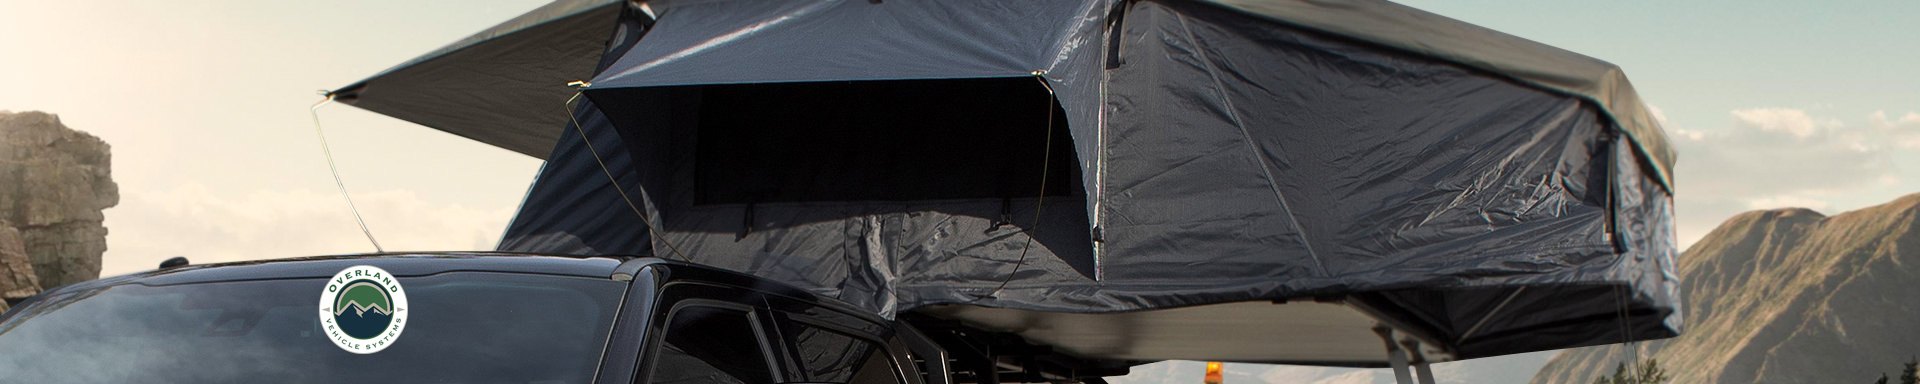 Overland Car Tents